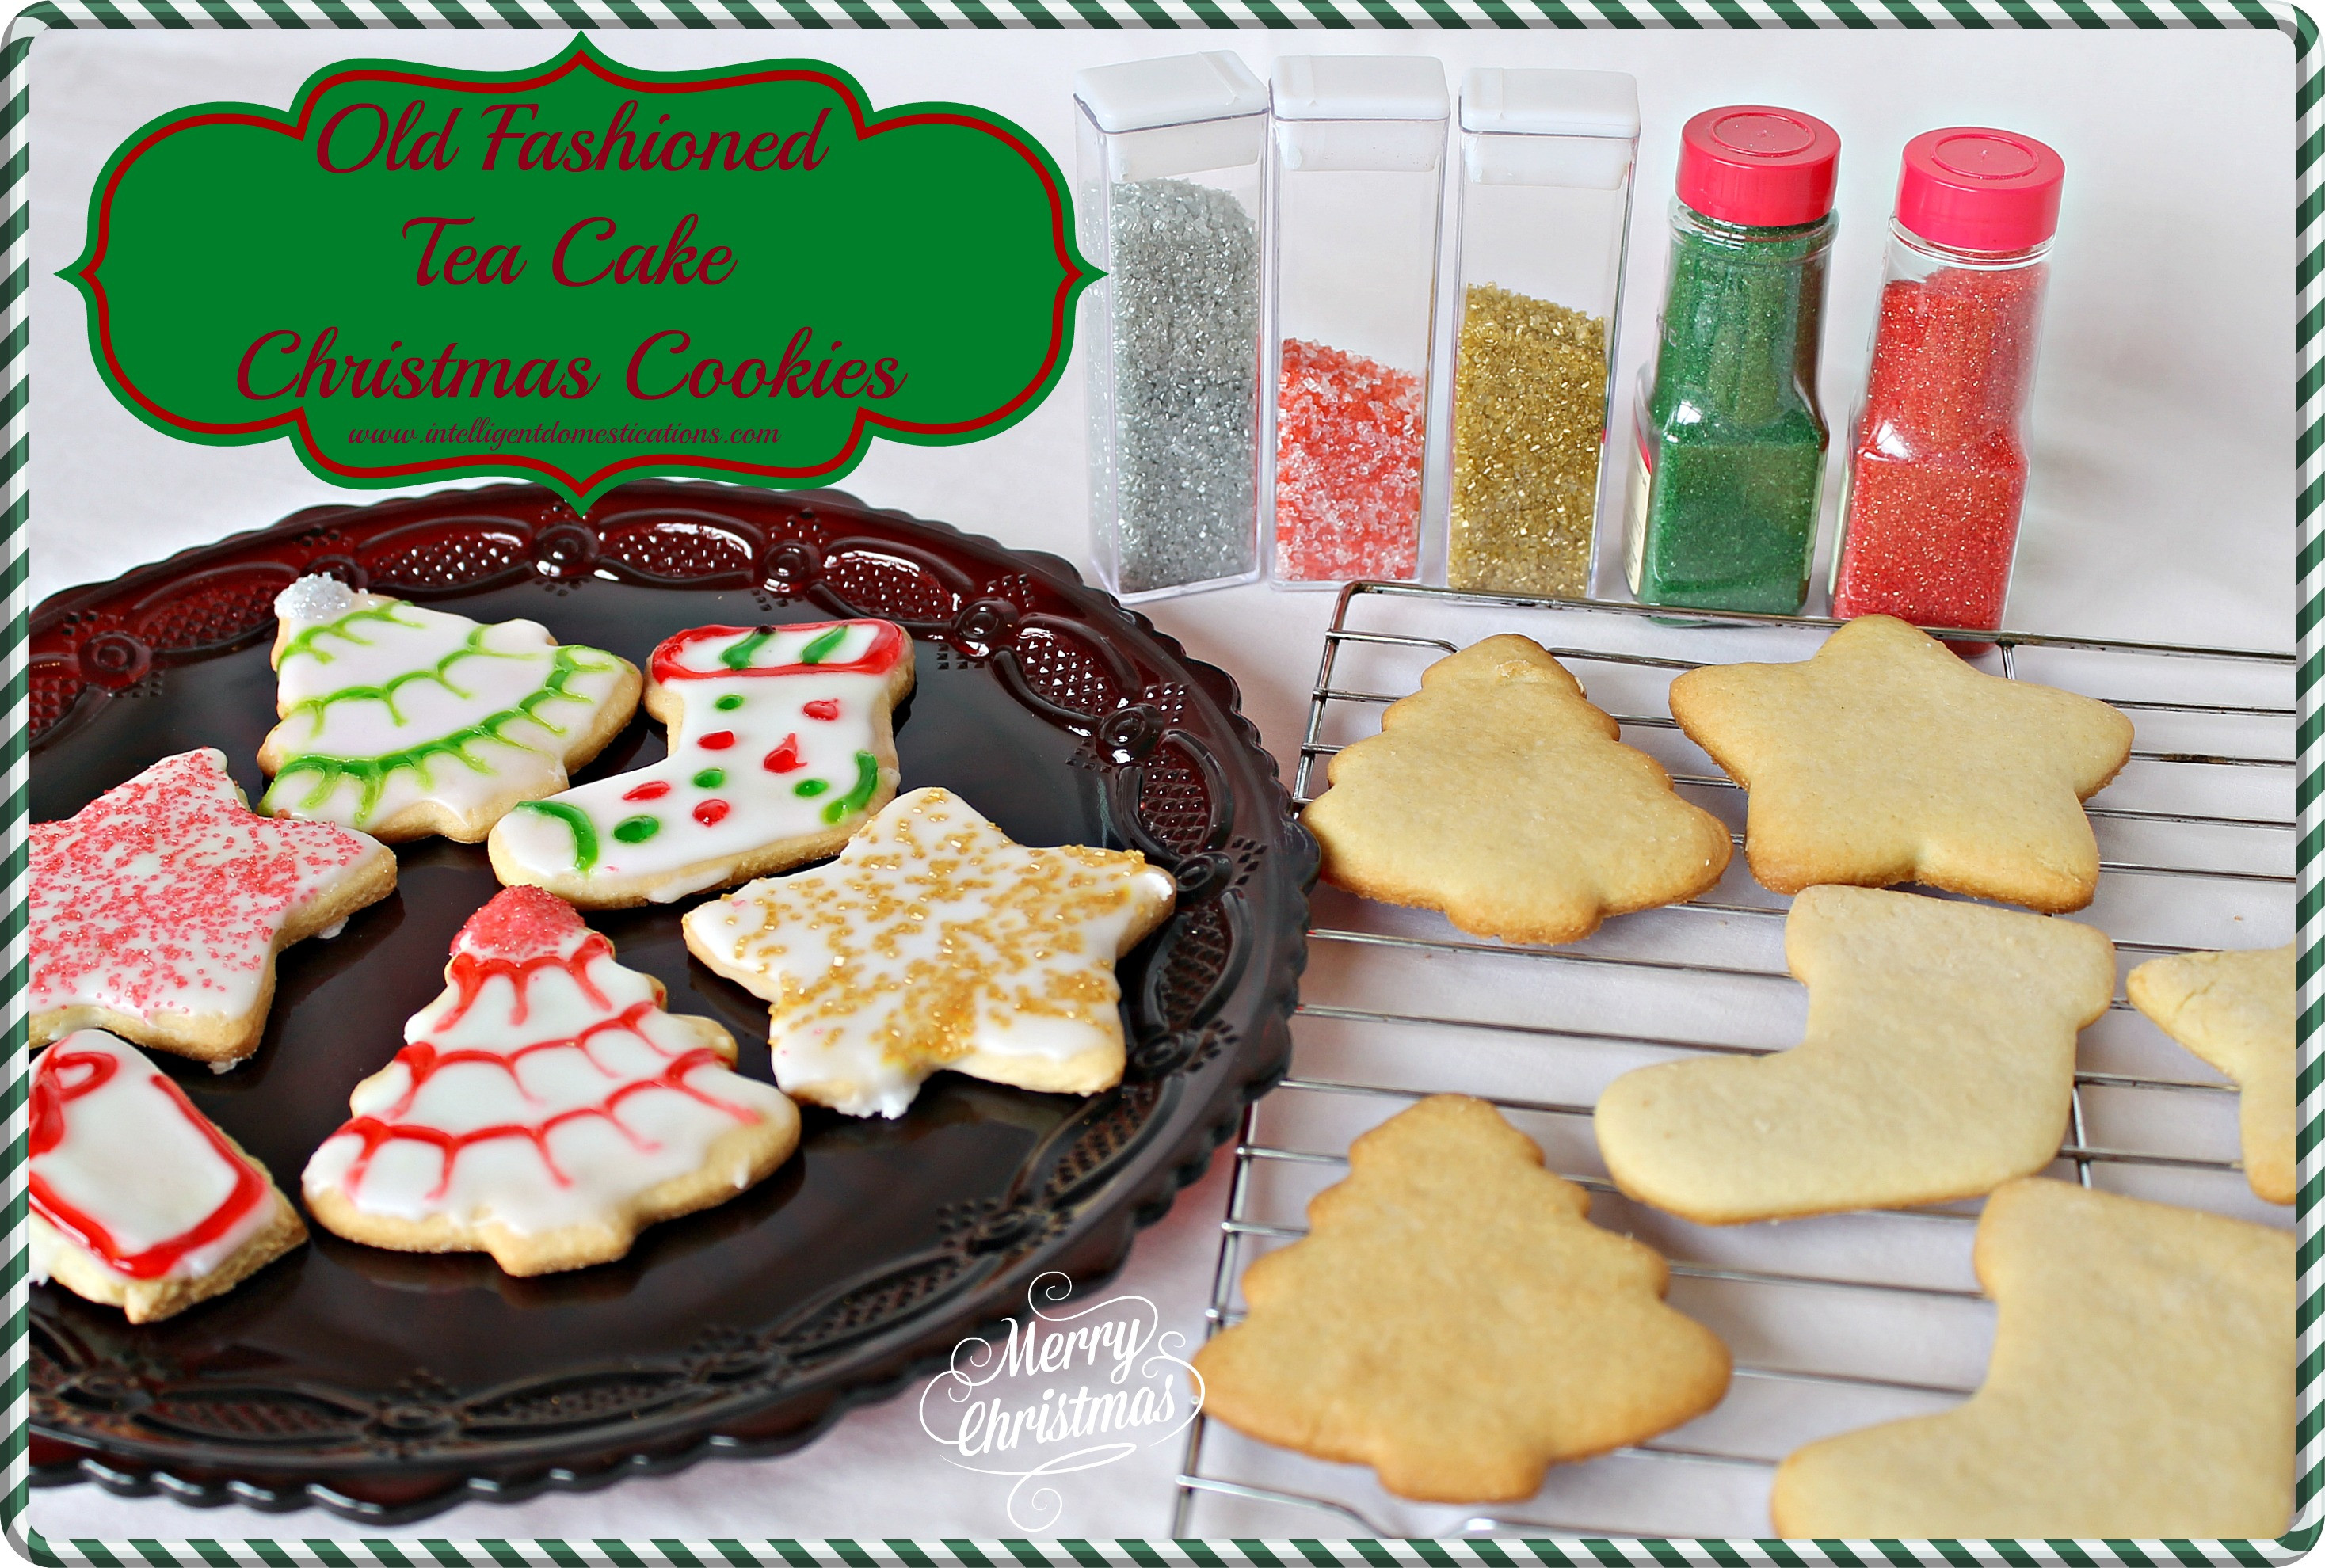 Old Fashioned Christmas Cookies
 Old Fashioned Tea Cake Christmas Cookies